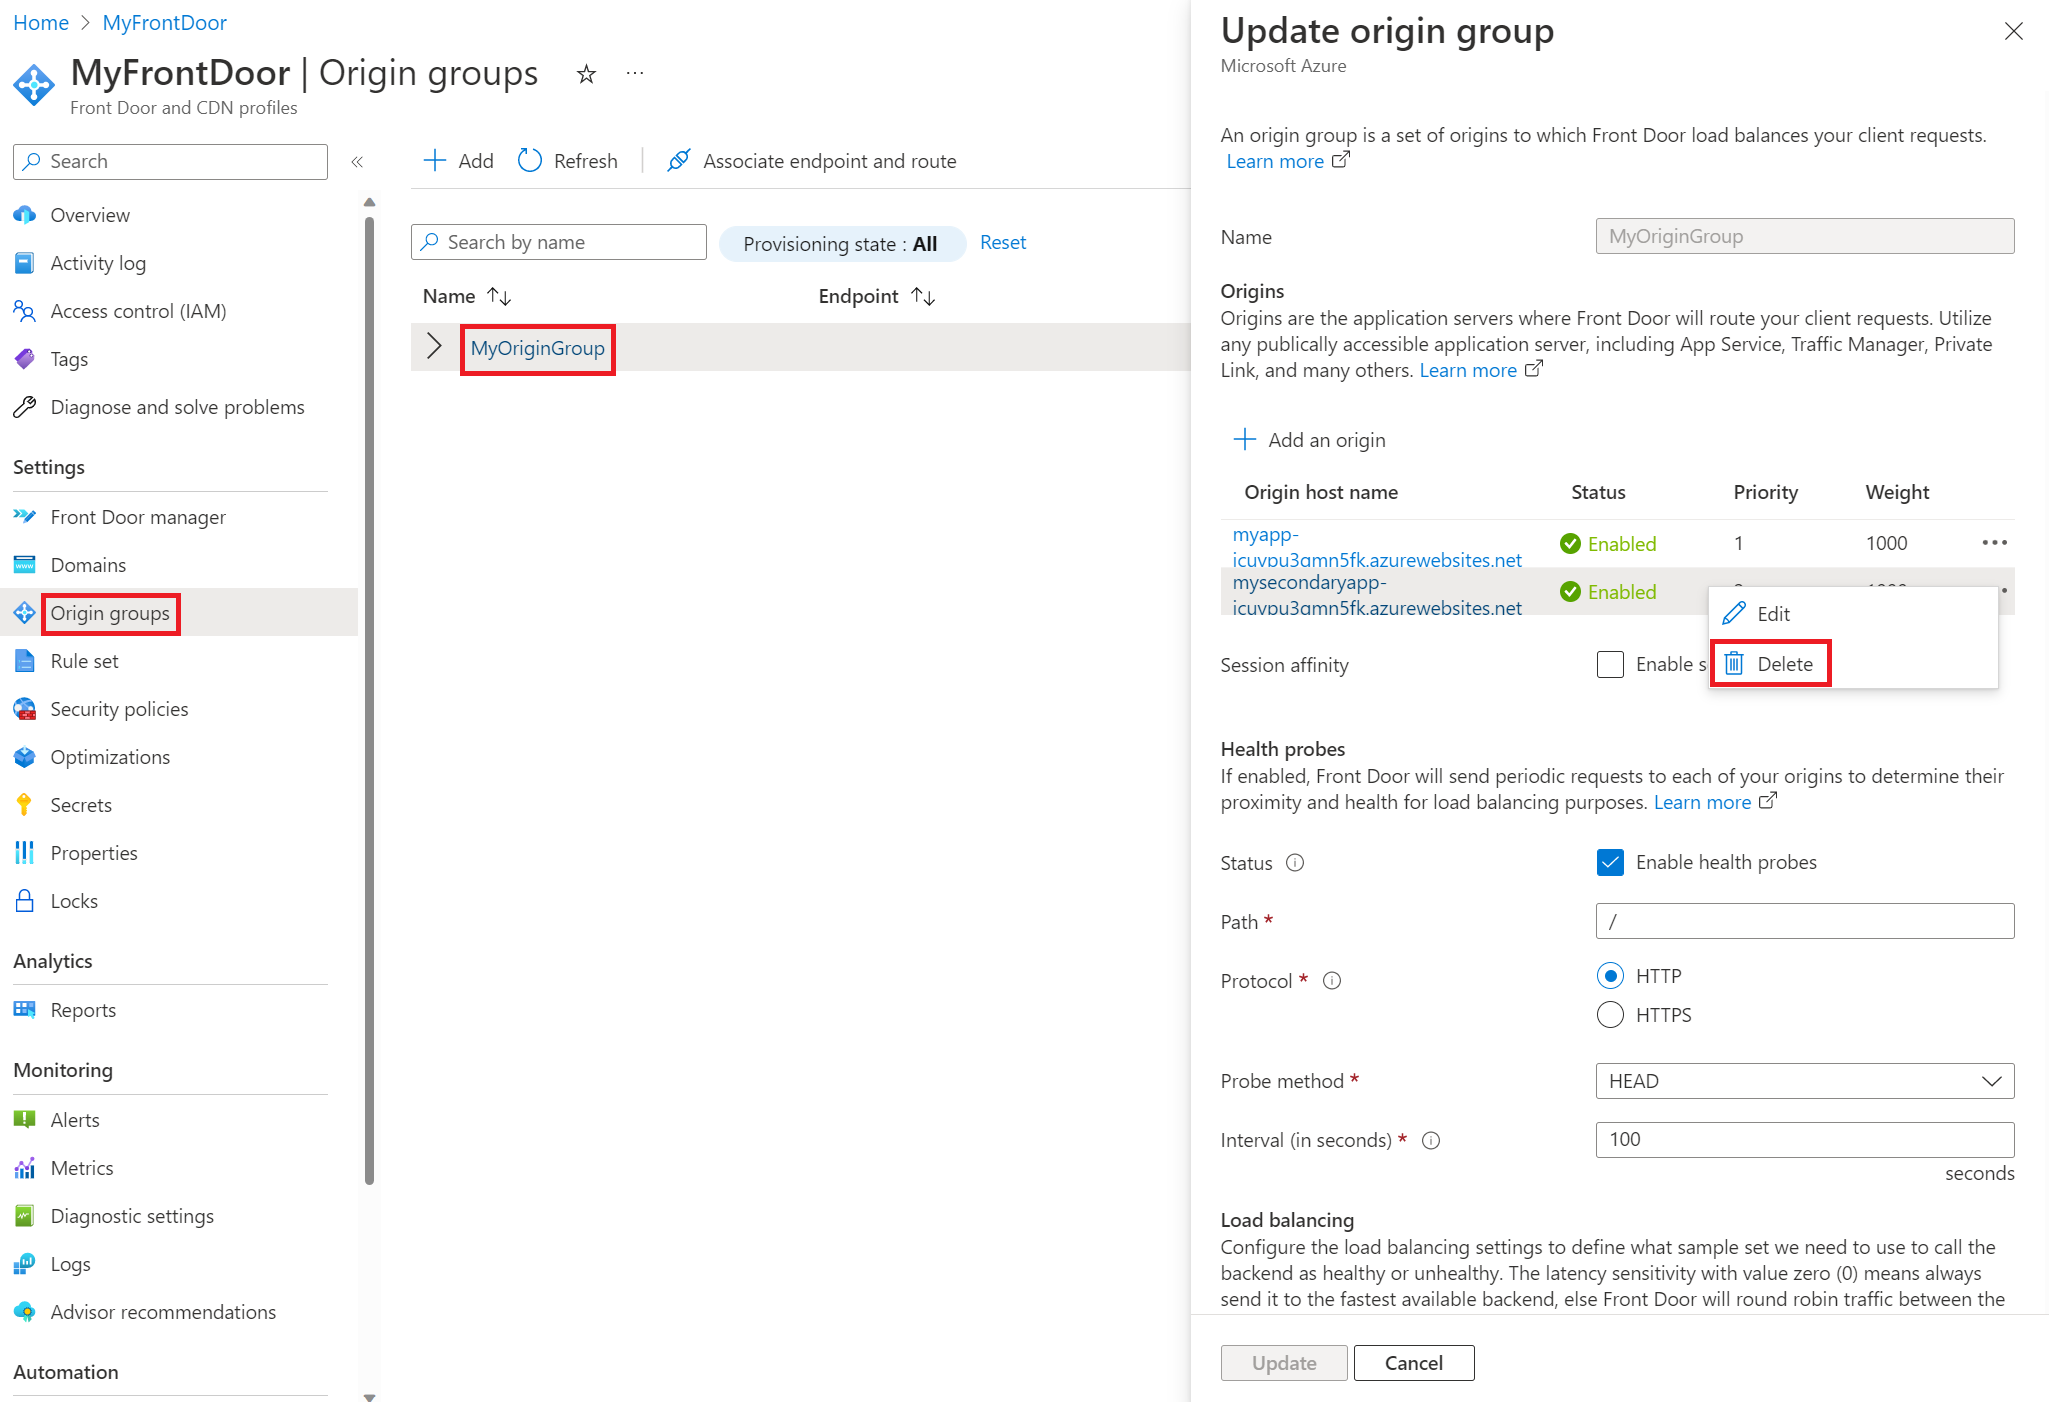 Highly available multi-region web app - Azure Architecture Center